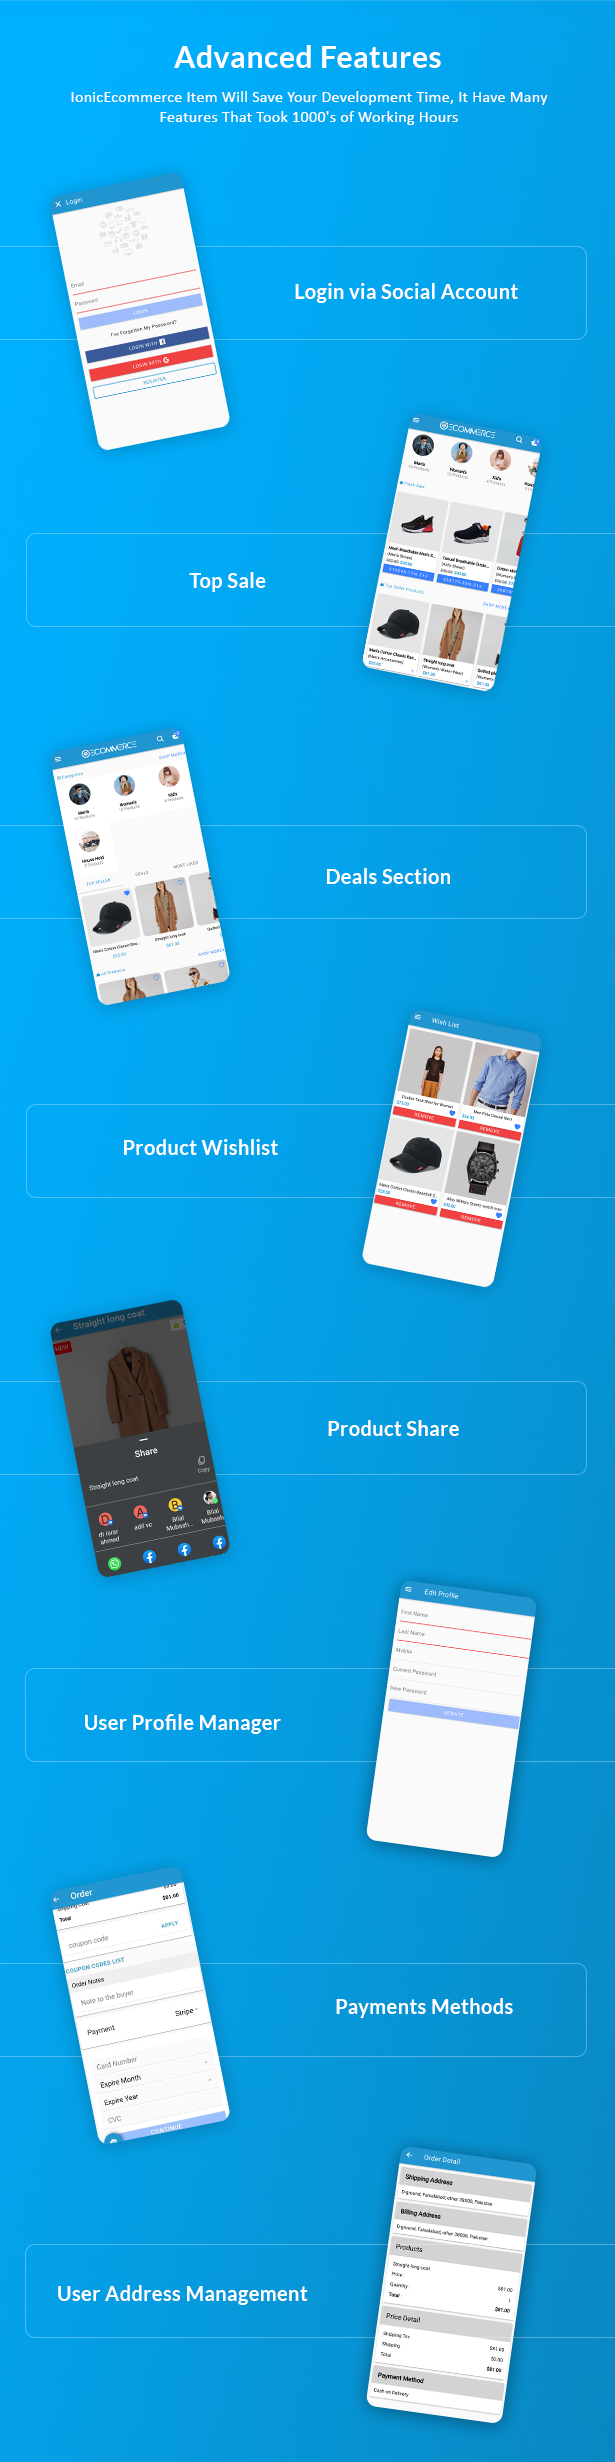 Ionic5 Ecommerce - Universal iOS & Android Ecommerce / Store Full Mobile App with Laravel CMS - 20